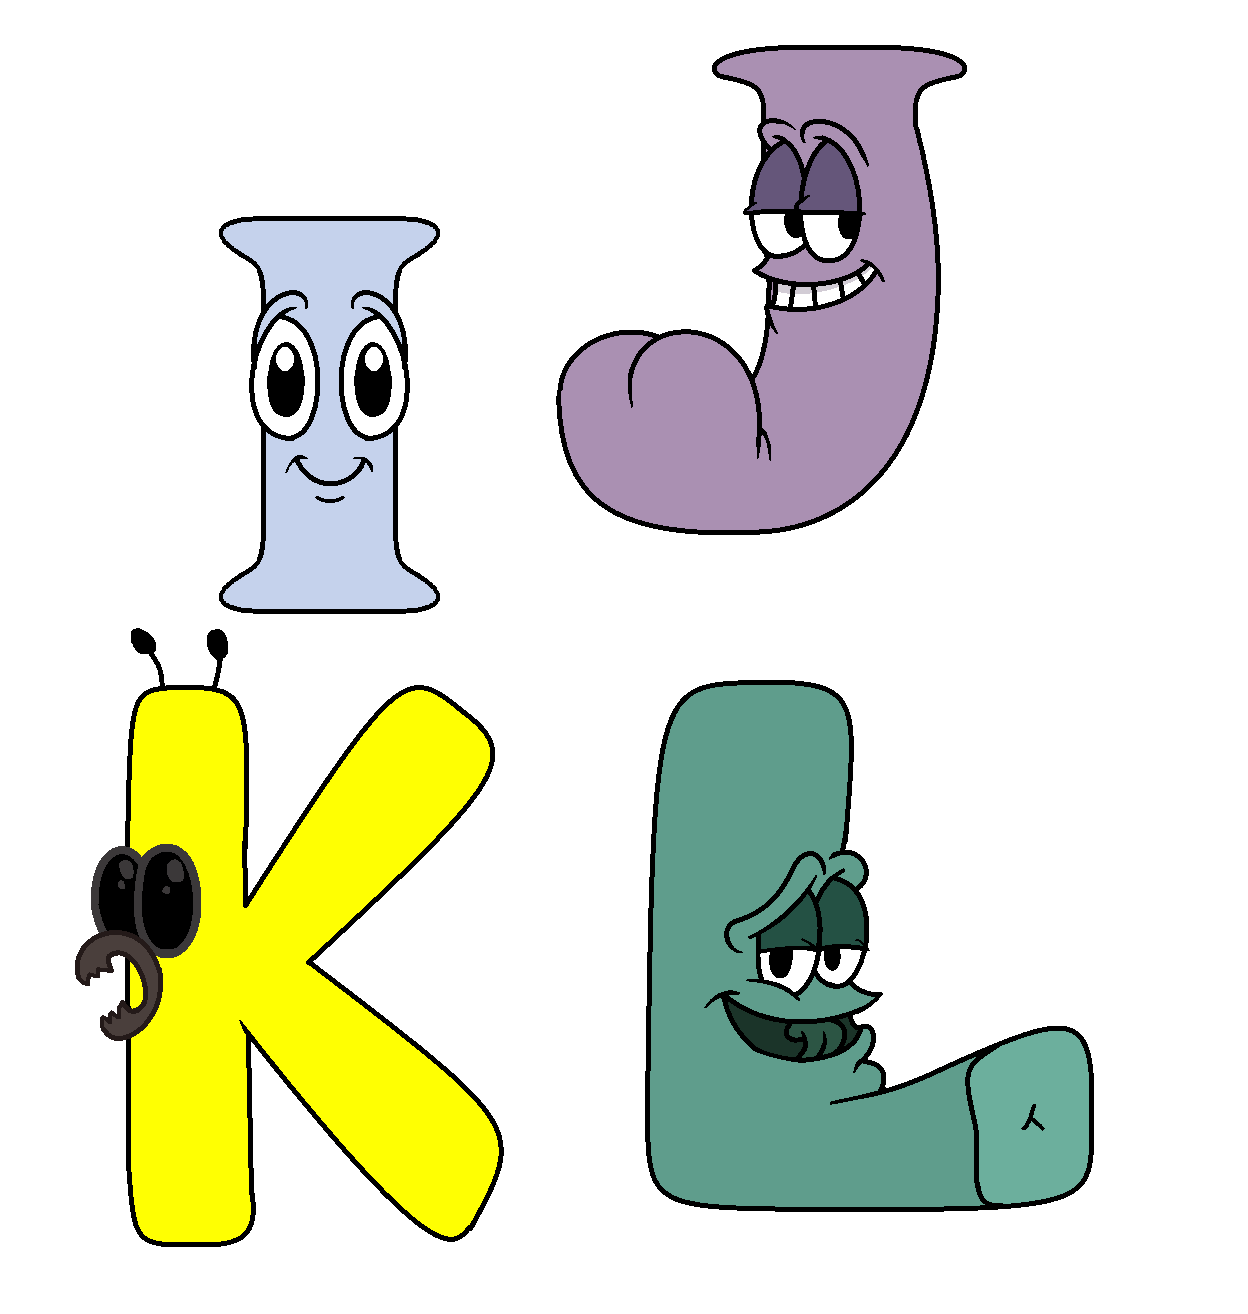 Drawing Alphabet Lore Part 3 by BlueberryCamille on DeviantArt